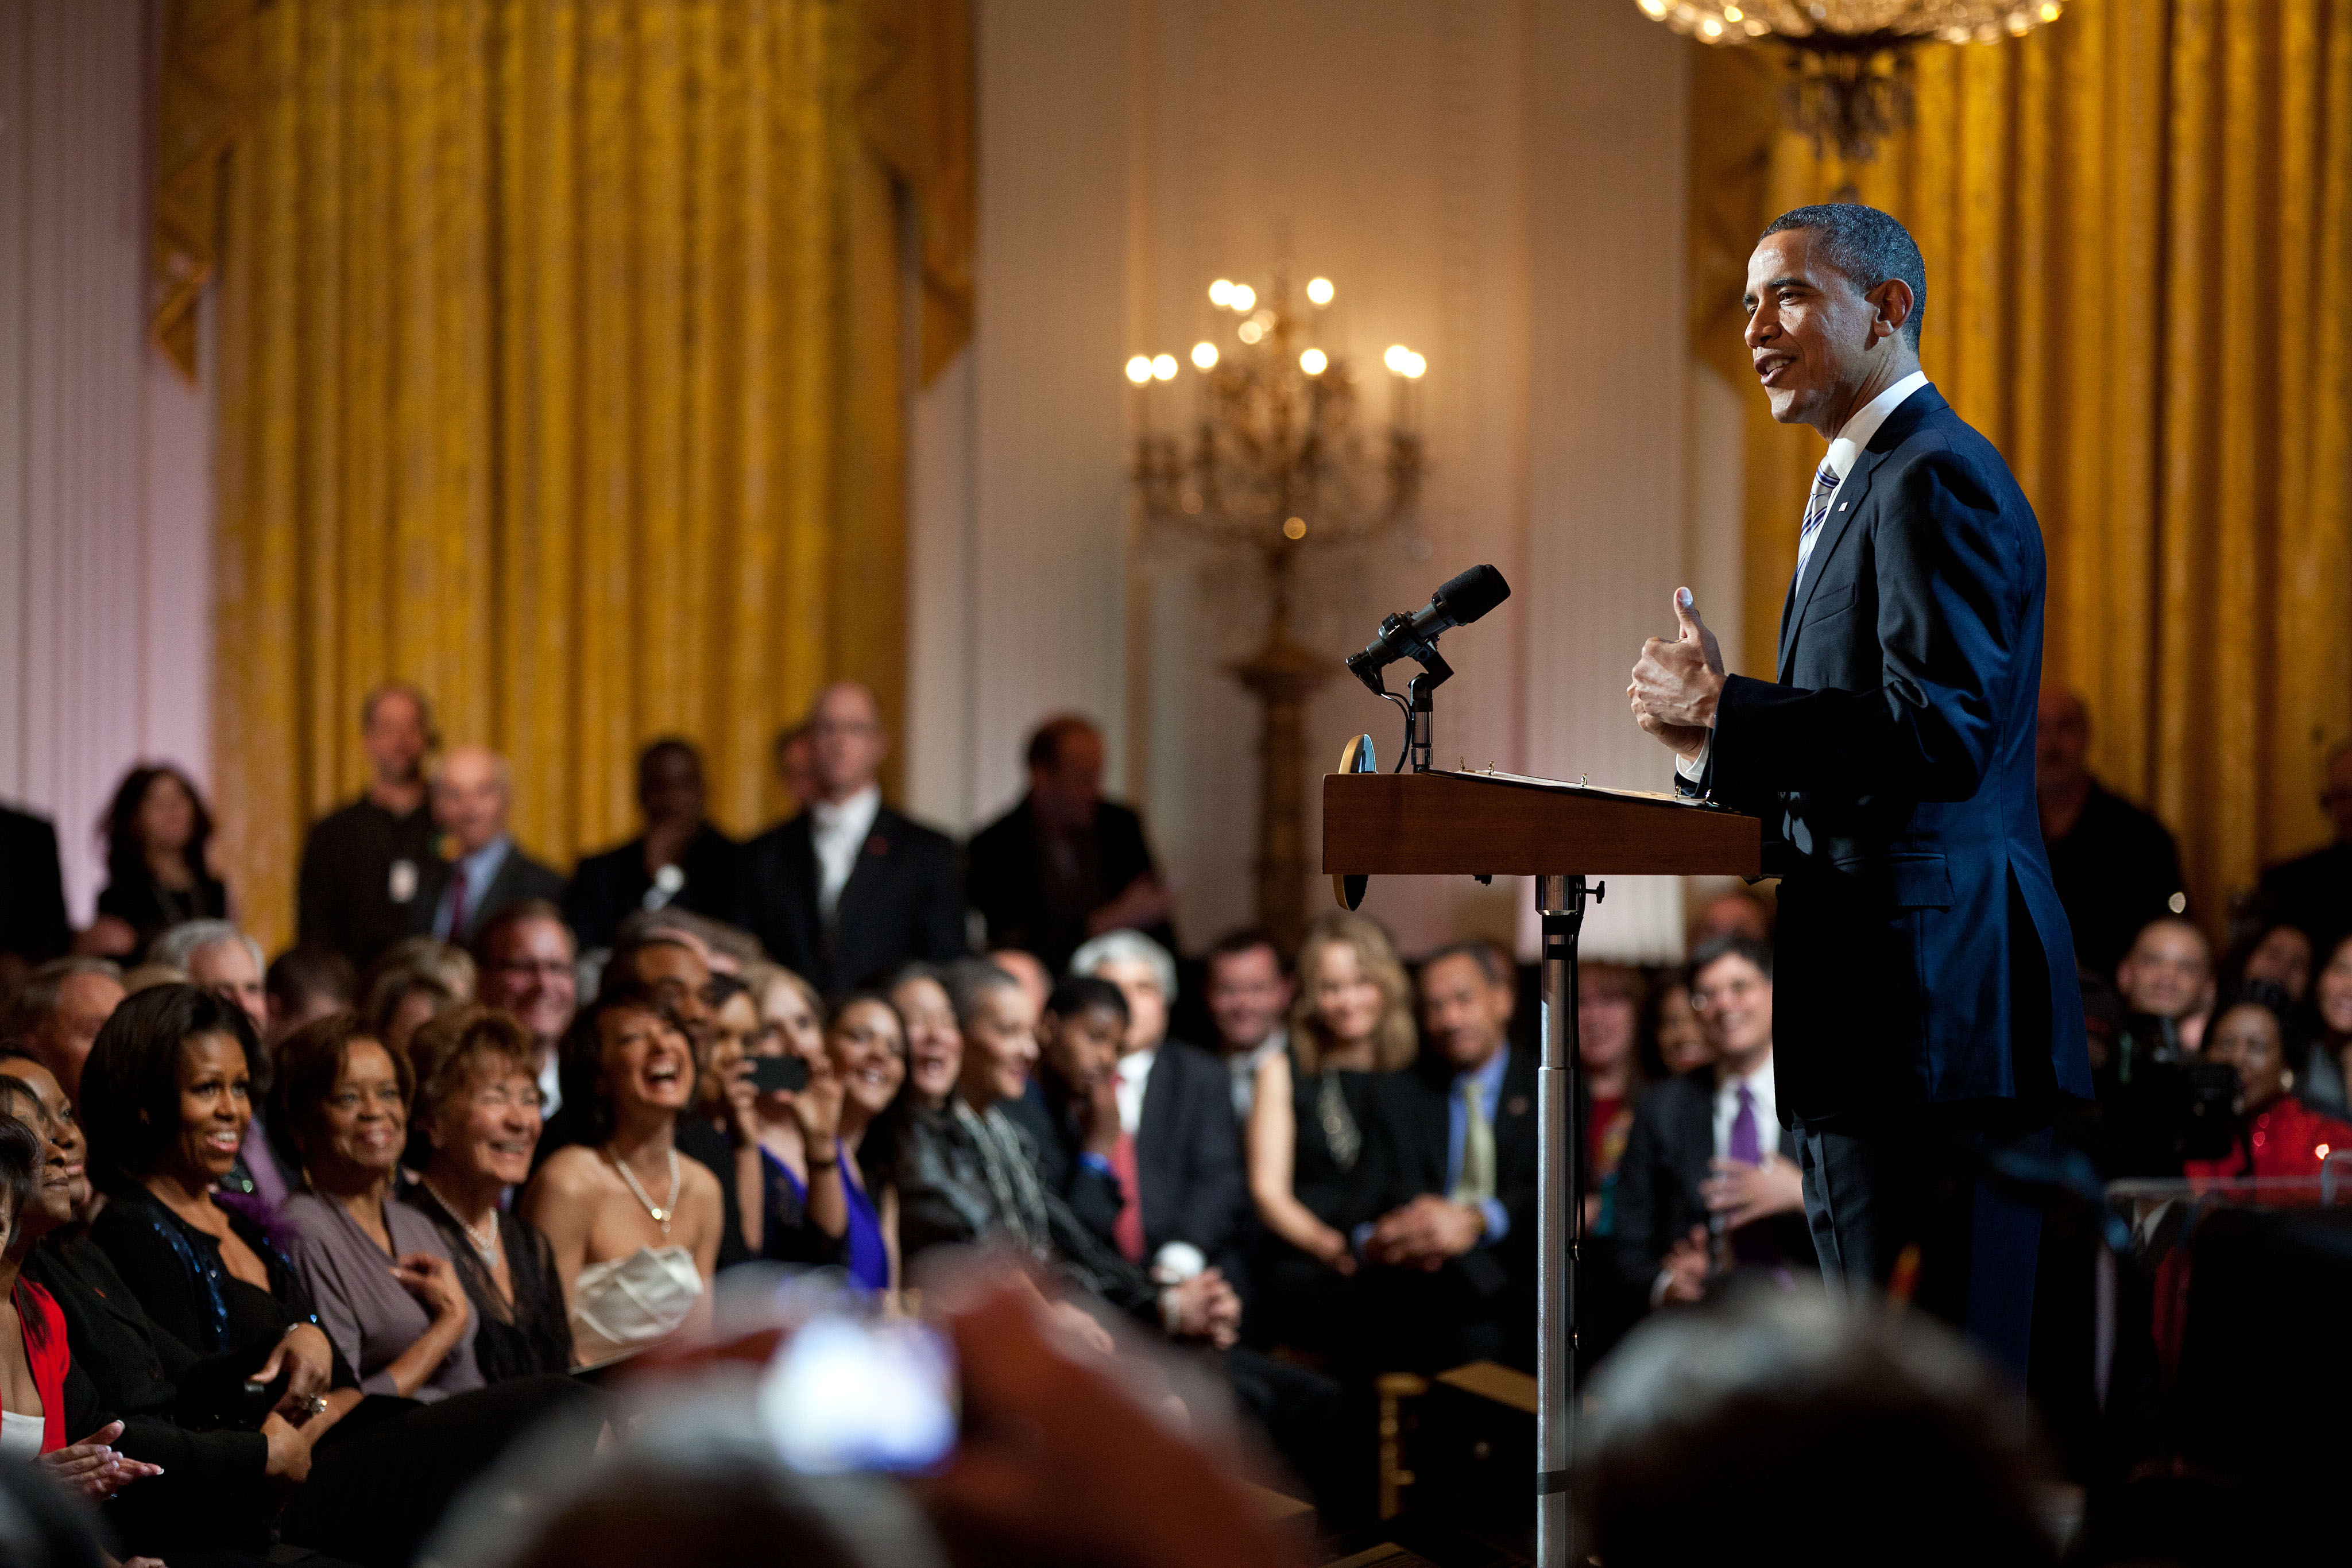 President Barack Obama hosts, “In Performance at the White House: Red, White and Blues” (February 21, 2012) 